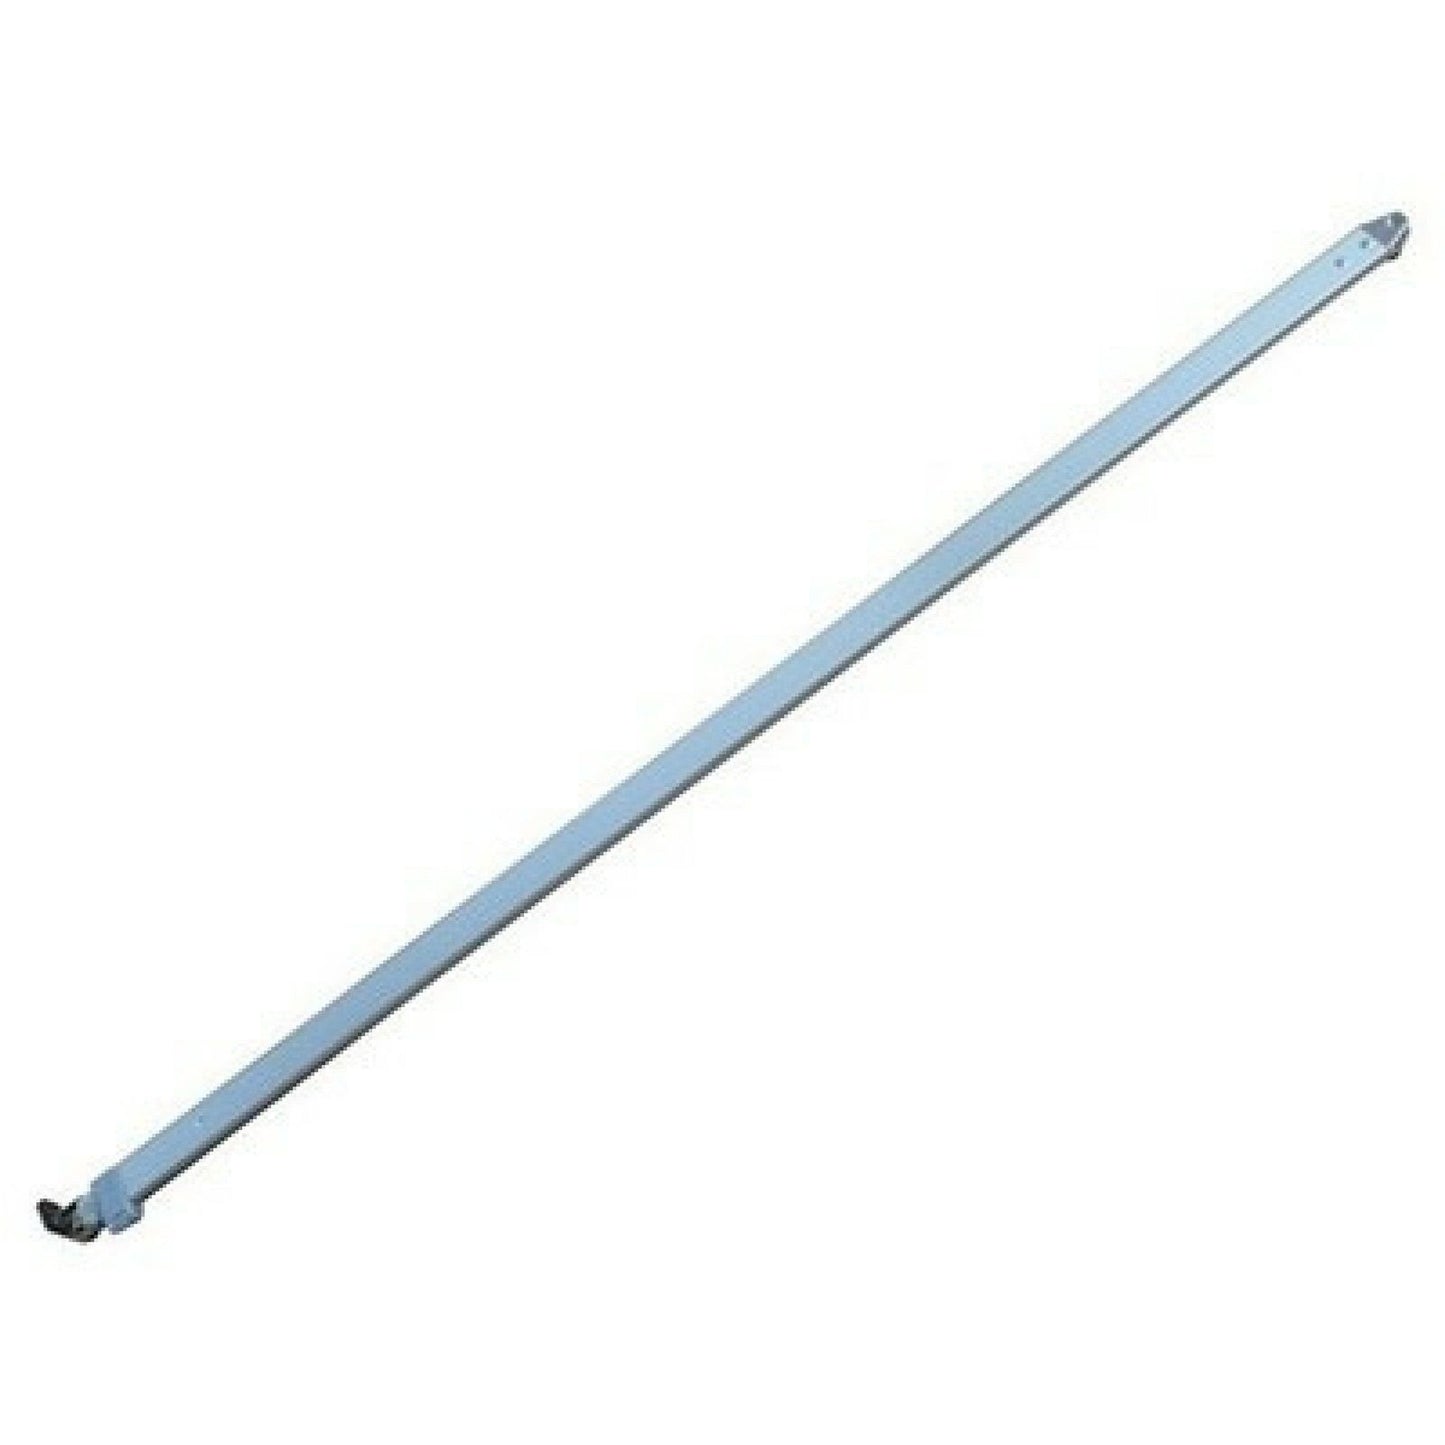 Fiamma Caravanstore R/H Support Leg made by Fiamma. A Accessories sold by Quality Caravan Awnings